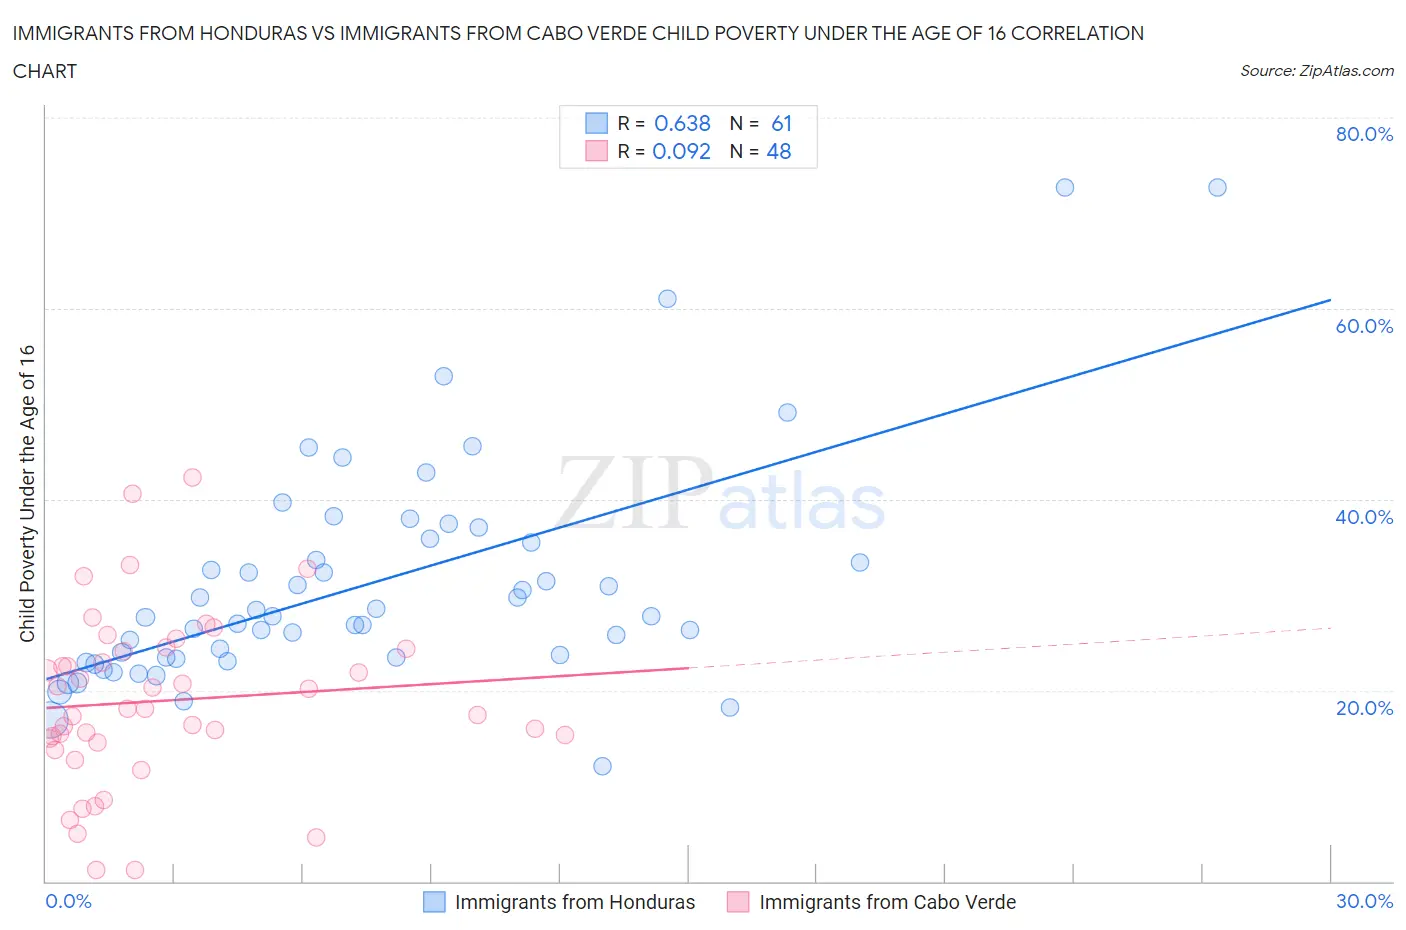 Immigrants from Honduras vs Immigrants from Cabo Verde Child Poverty Under the Age of 16